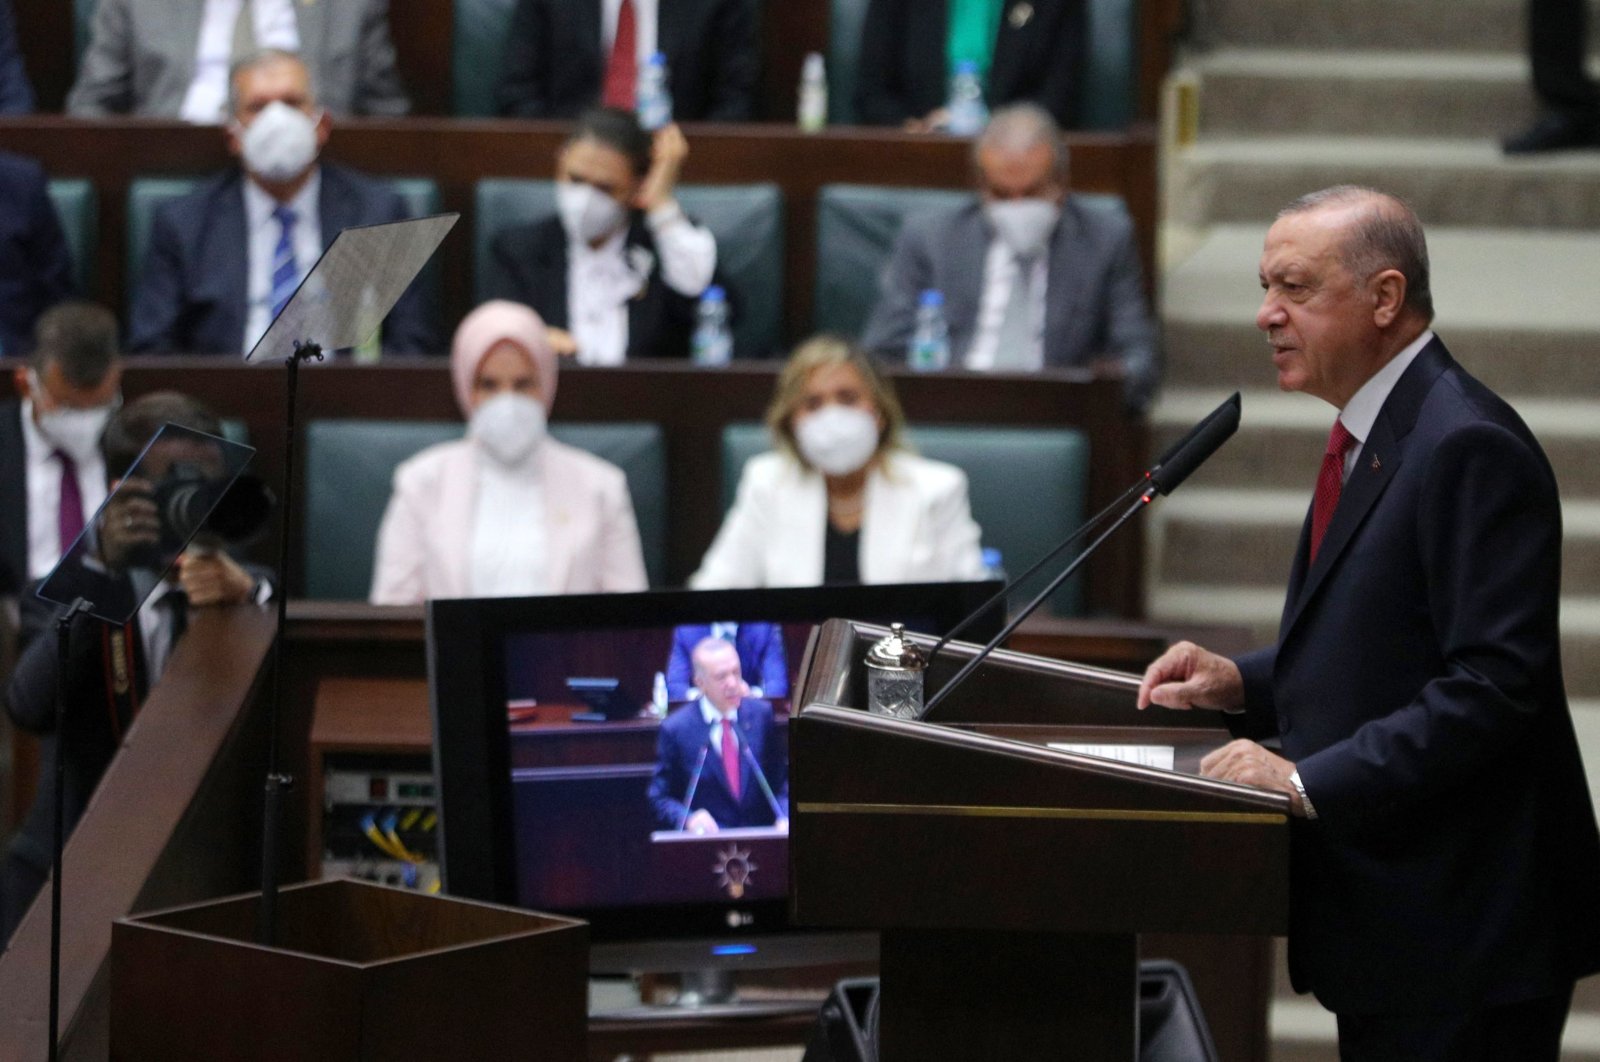 Turkish President and leader of the Justice and Development Party (AK Party), Recep Tayyip Erdoğan gives a speech during a party parliamentary group meeting at the Grand National Assembly of Turkey (TBMM) in Ankara, Turkey, July 14, 2021. (AFP Photo)